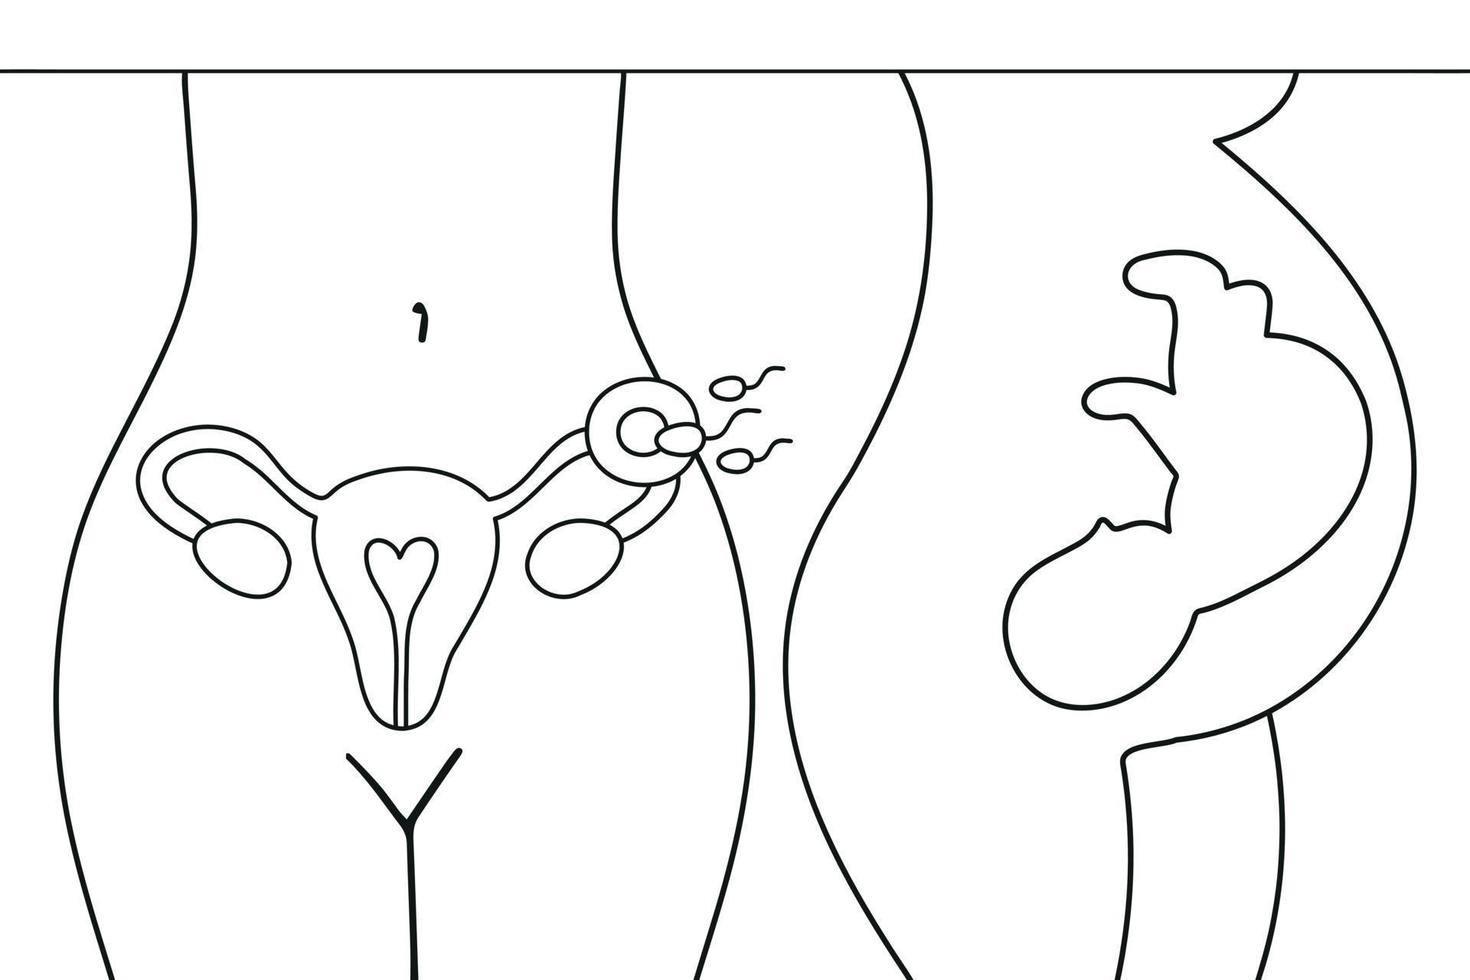 Uterus, sperm, insemination. Fertilization in the fallopian tube. Embryo in woman's belly. Gynecology, reproductive. Fetal baby positions in the uterus during pregnancy. vector